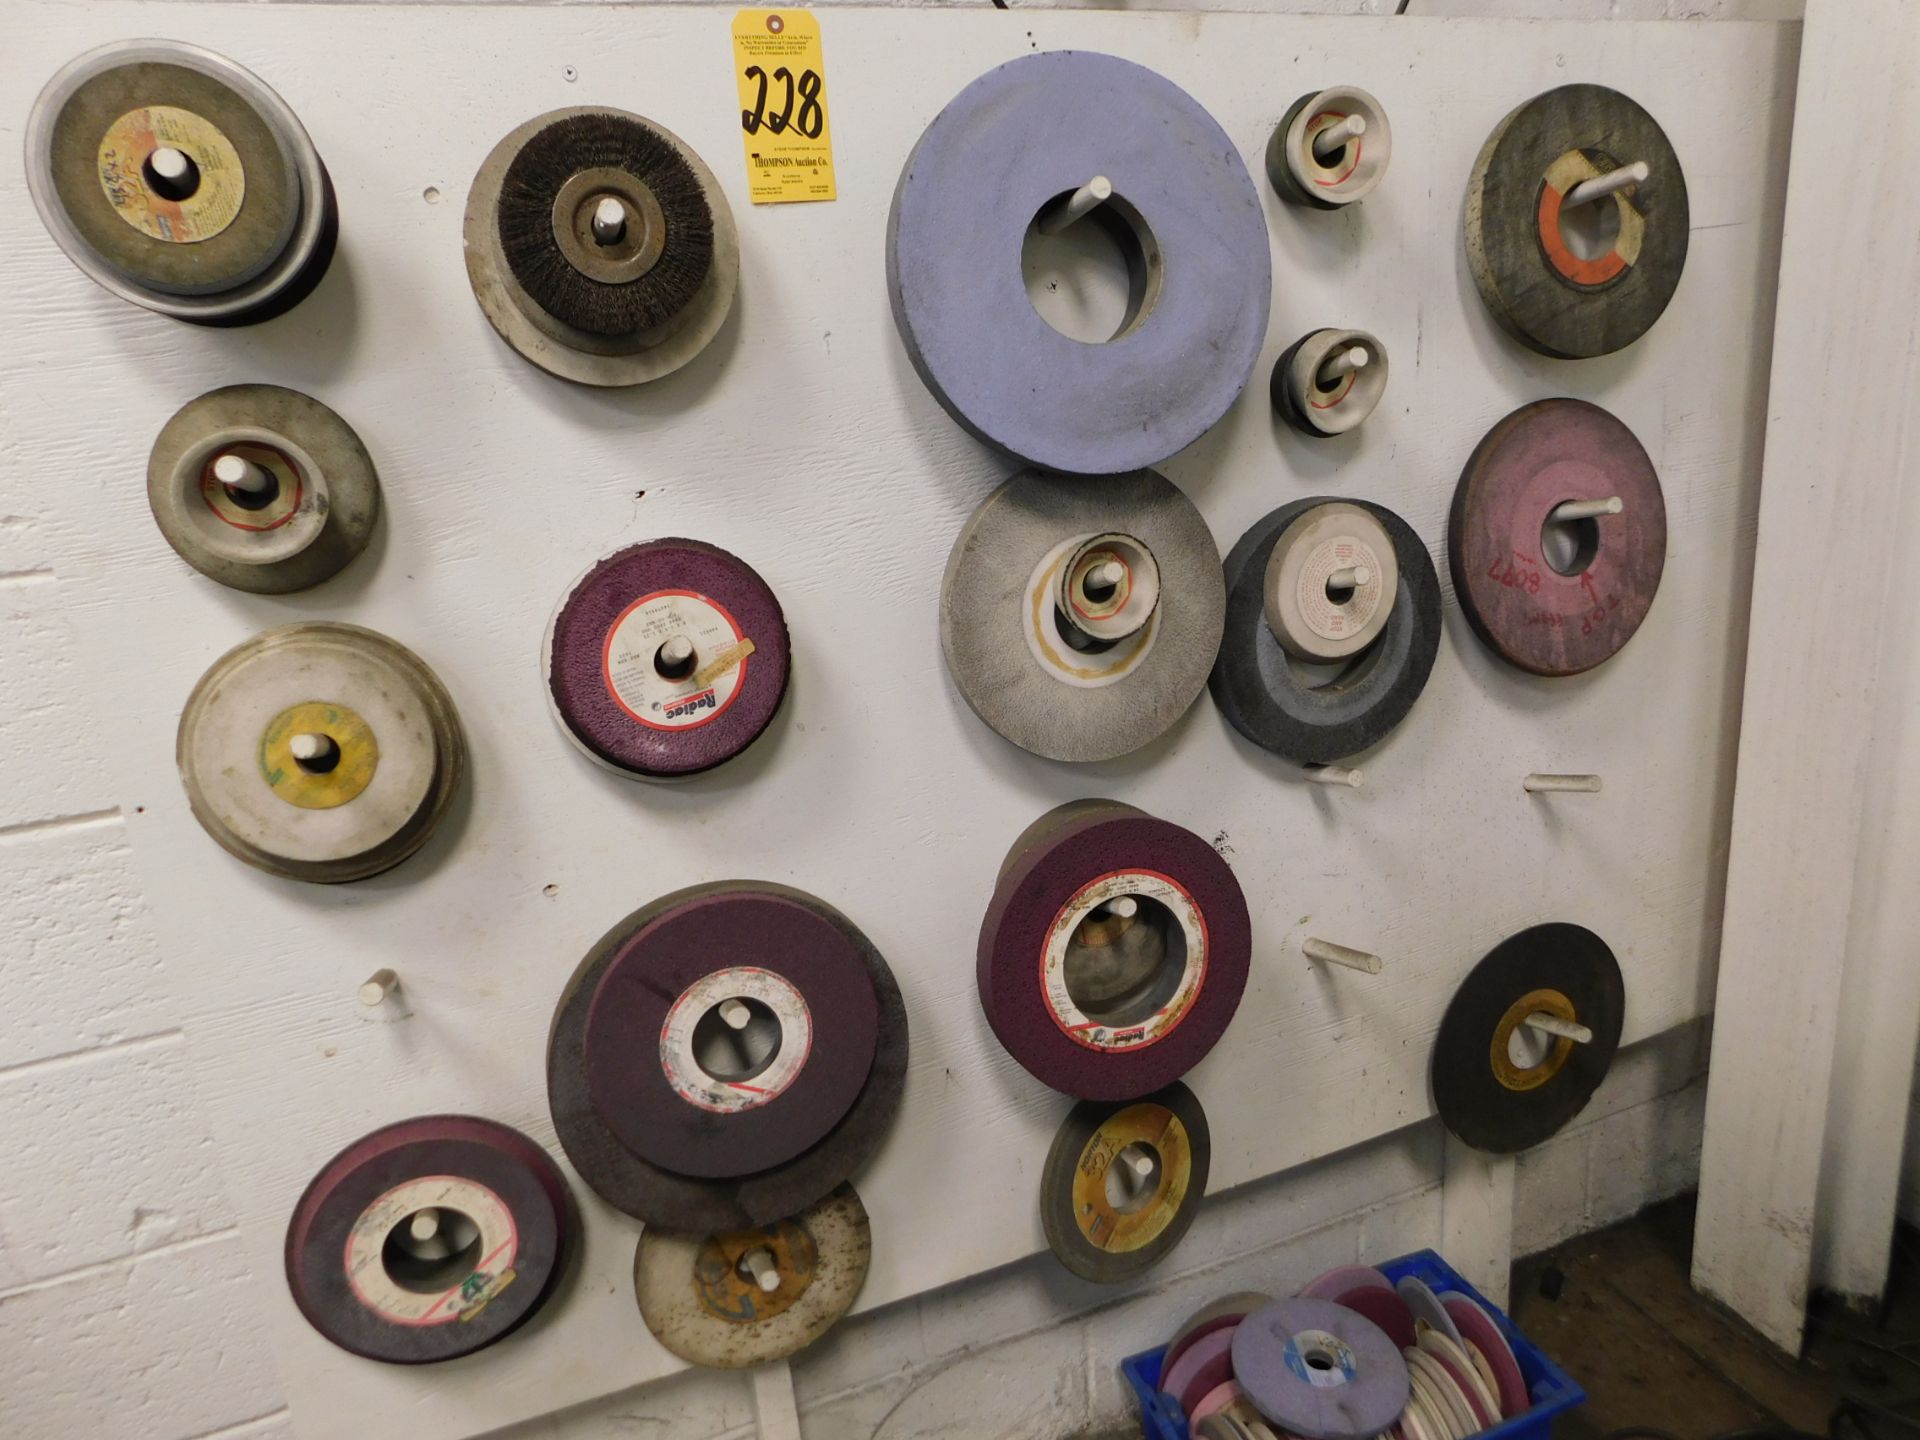 Grinding Wheels Hanging on Wall and in Plastic Tub